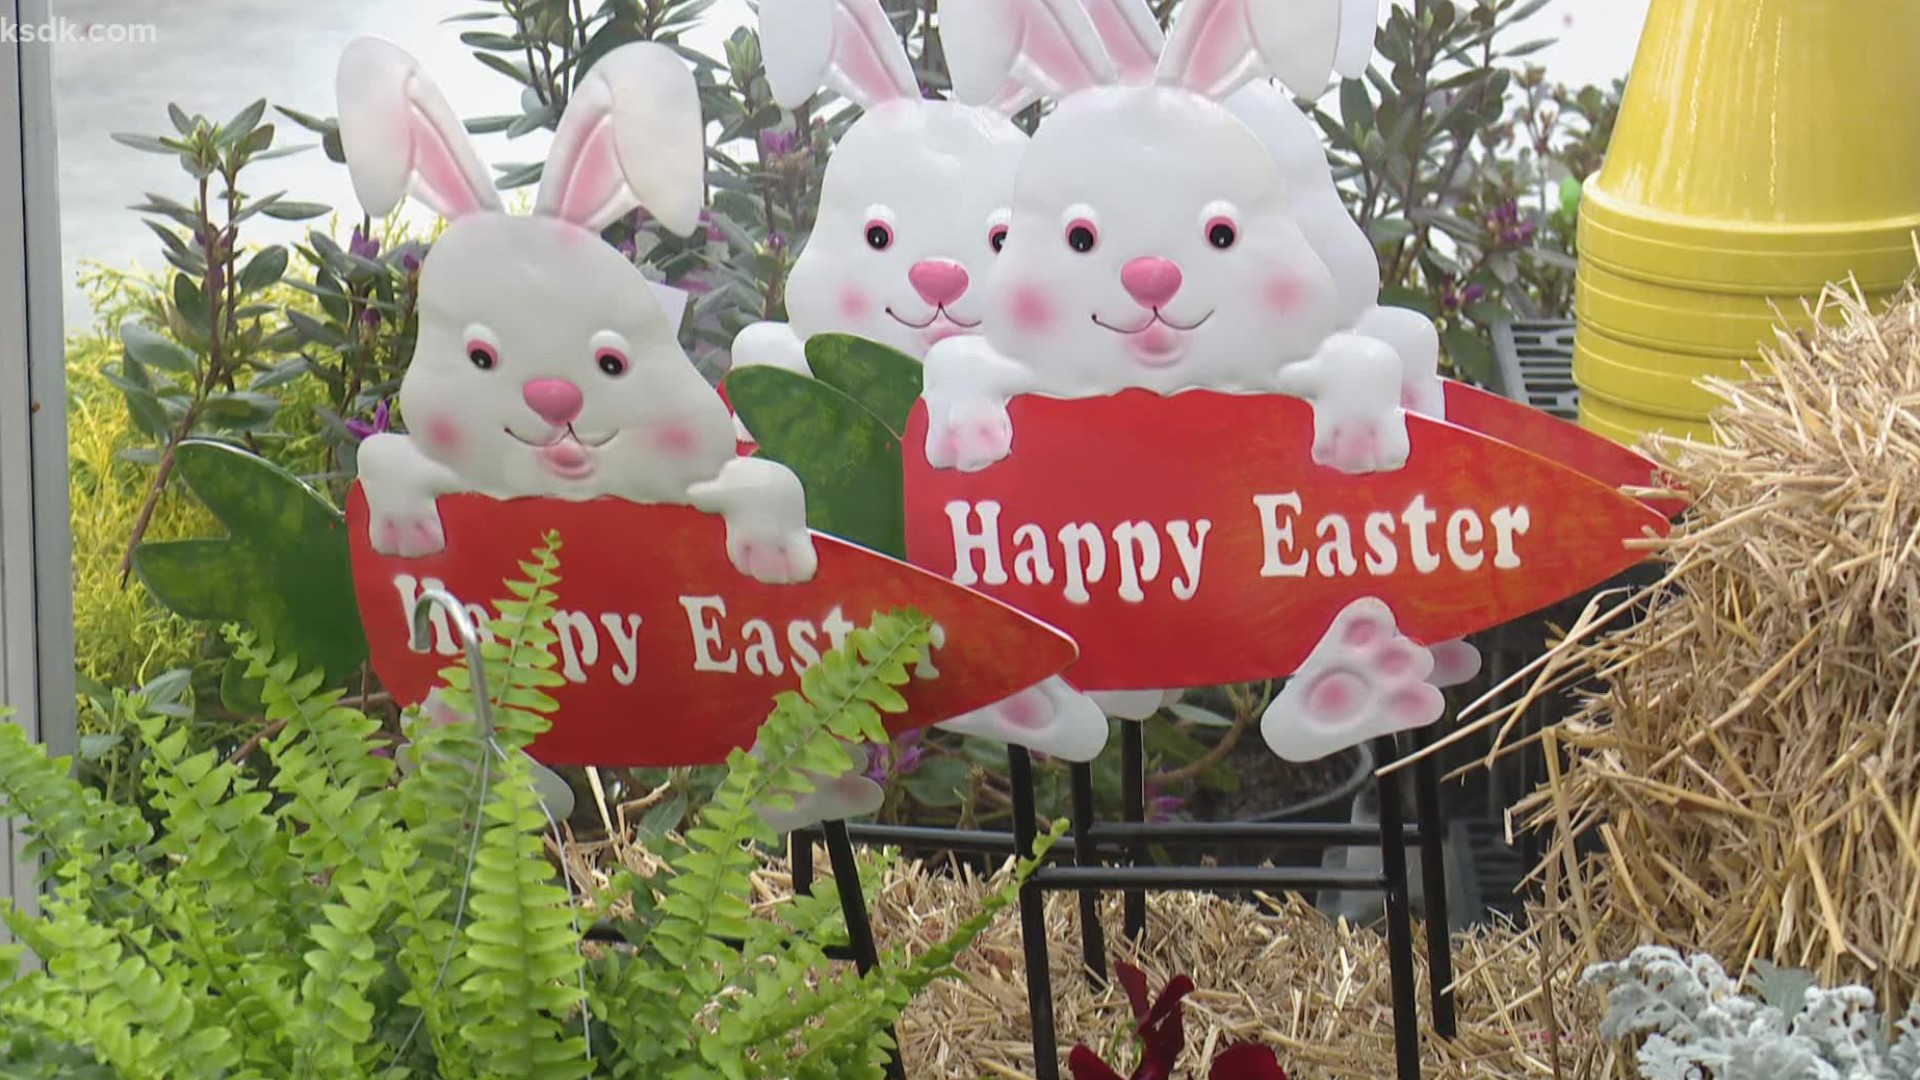 Easter activities are underway at Eckert's Farm in Belleville. Tickets for the Easter Egg hunt are limited.